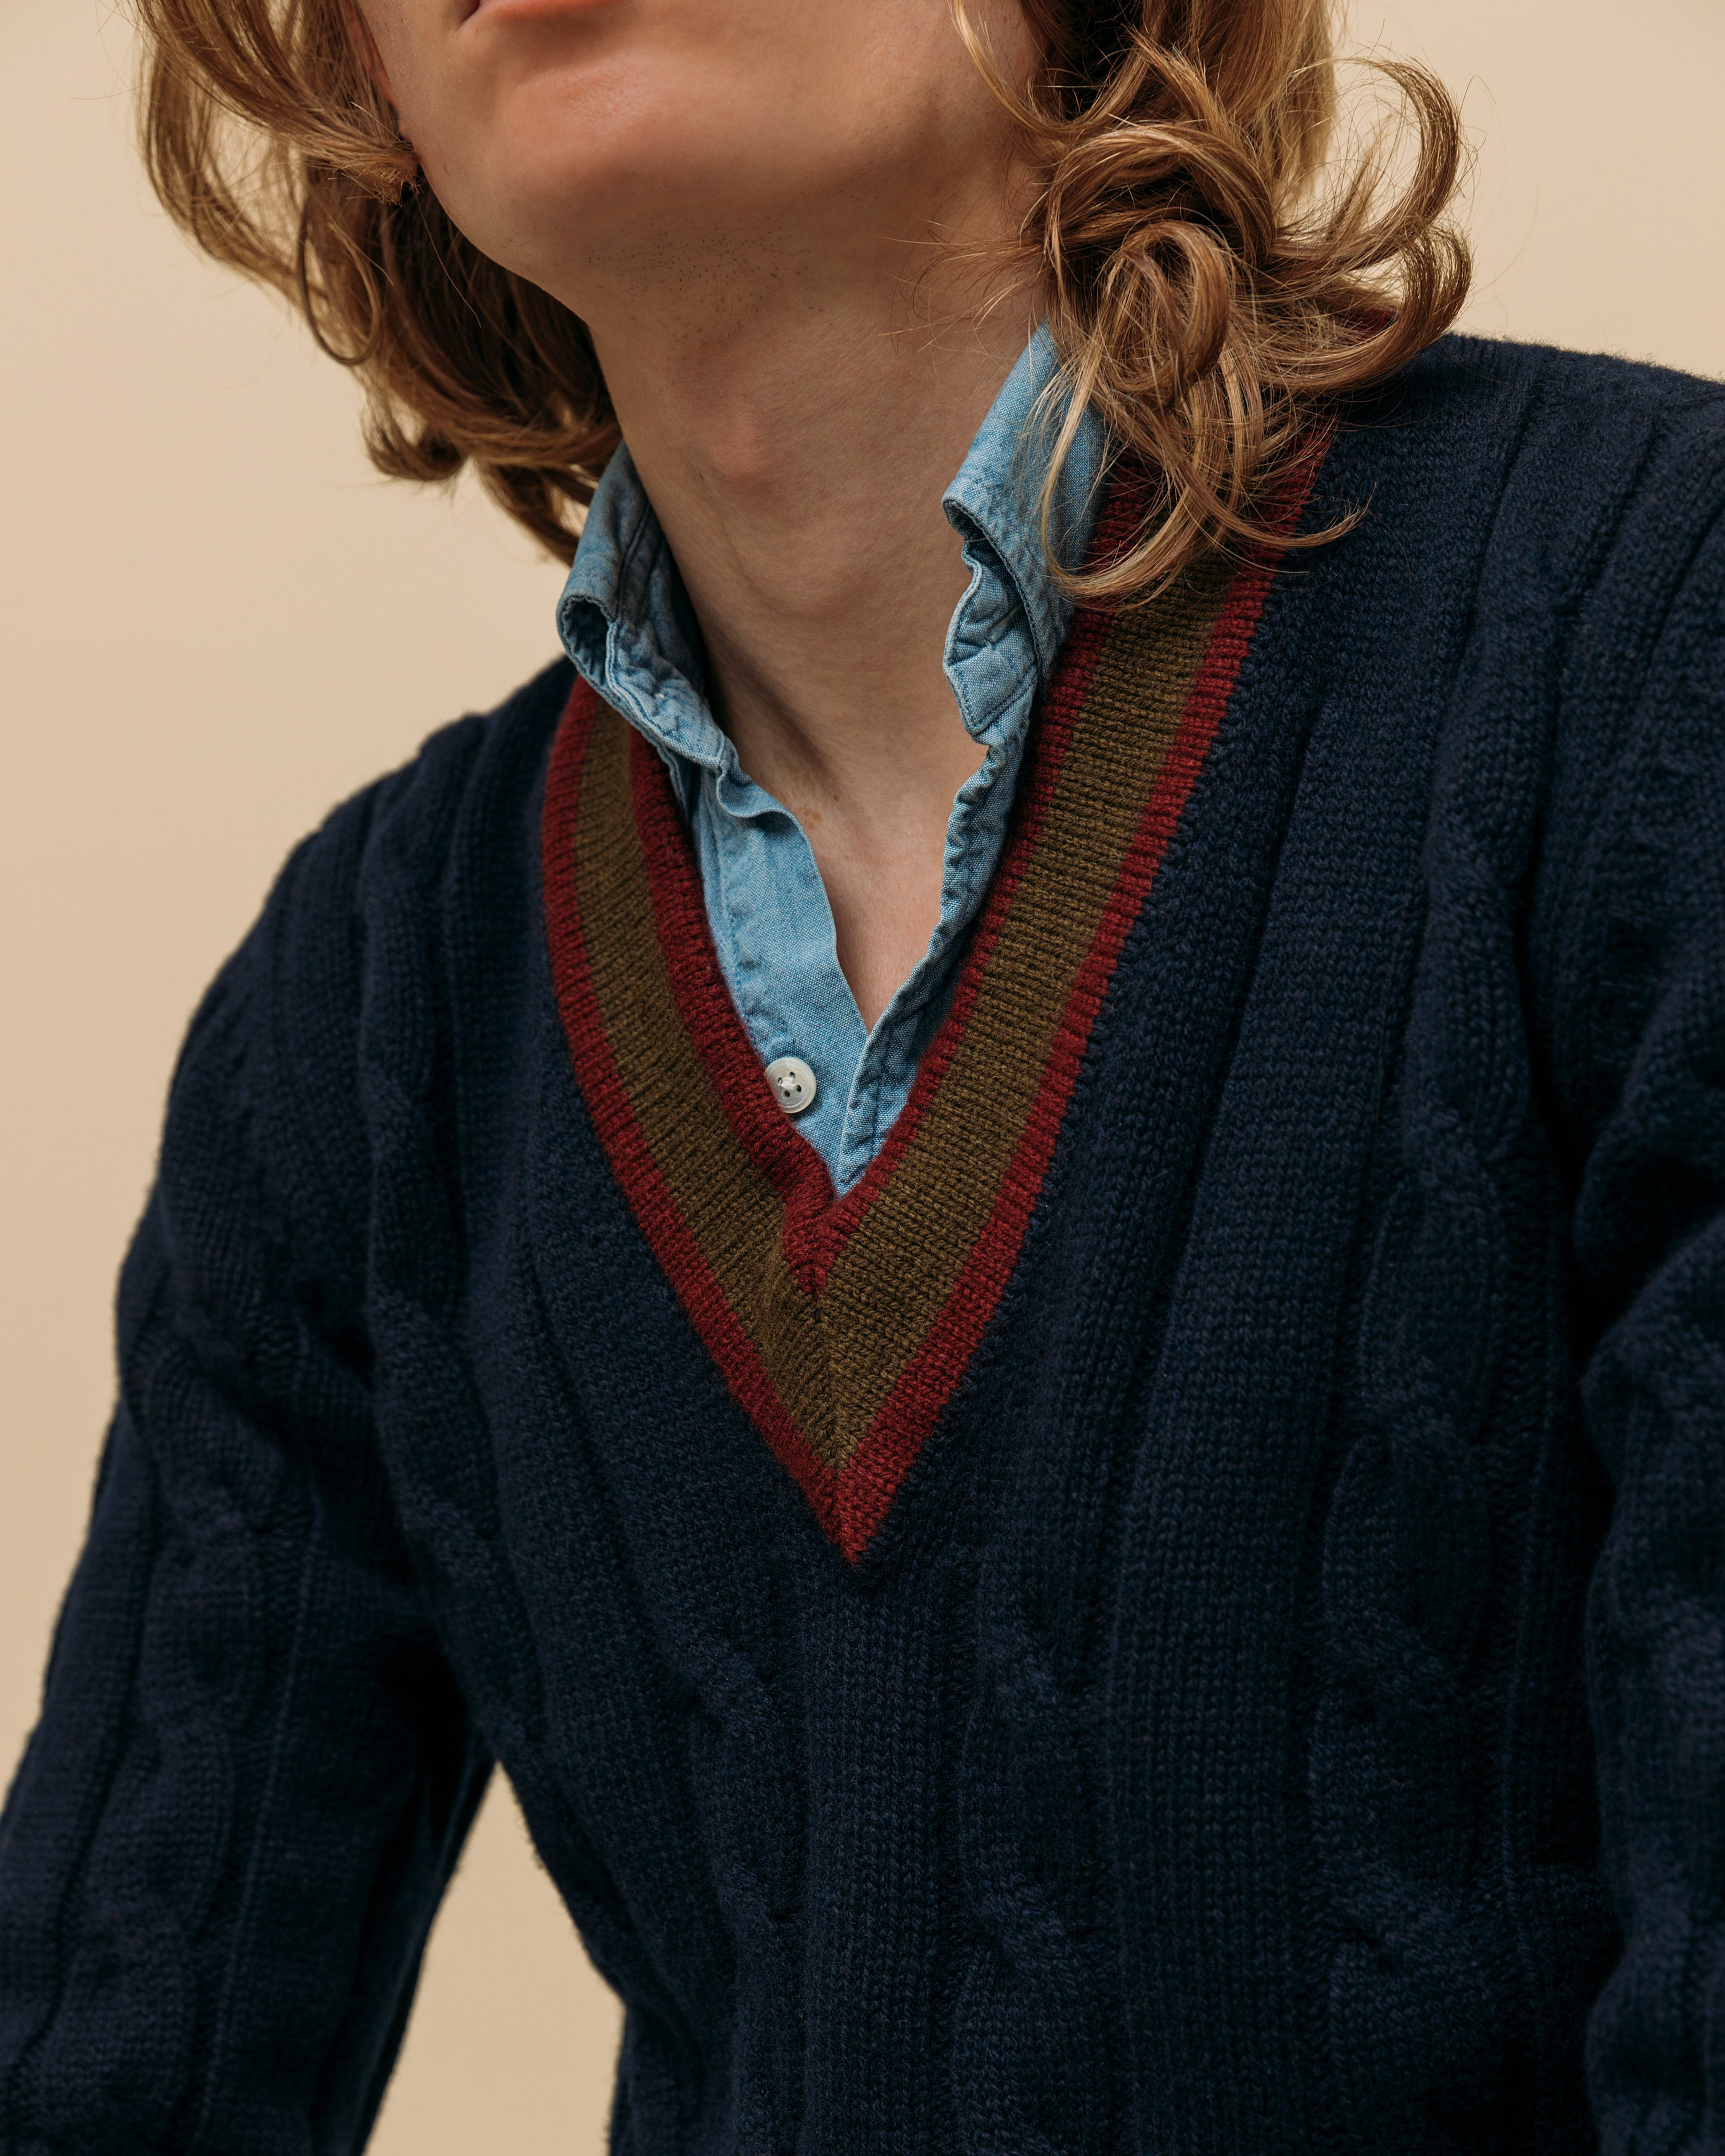 Superfine lambswool cricket sweater in navy burgundy and olive